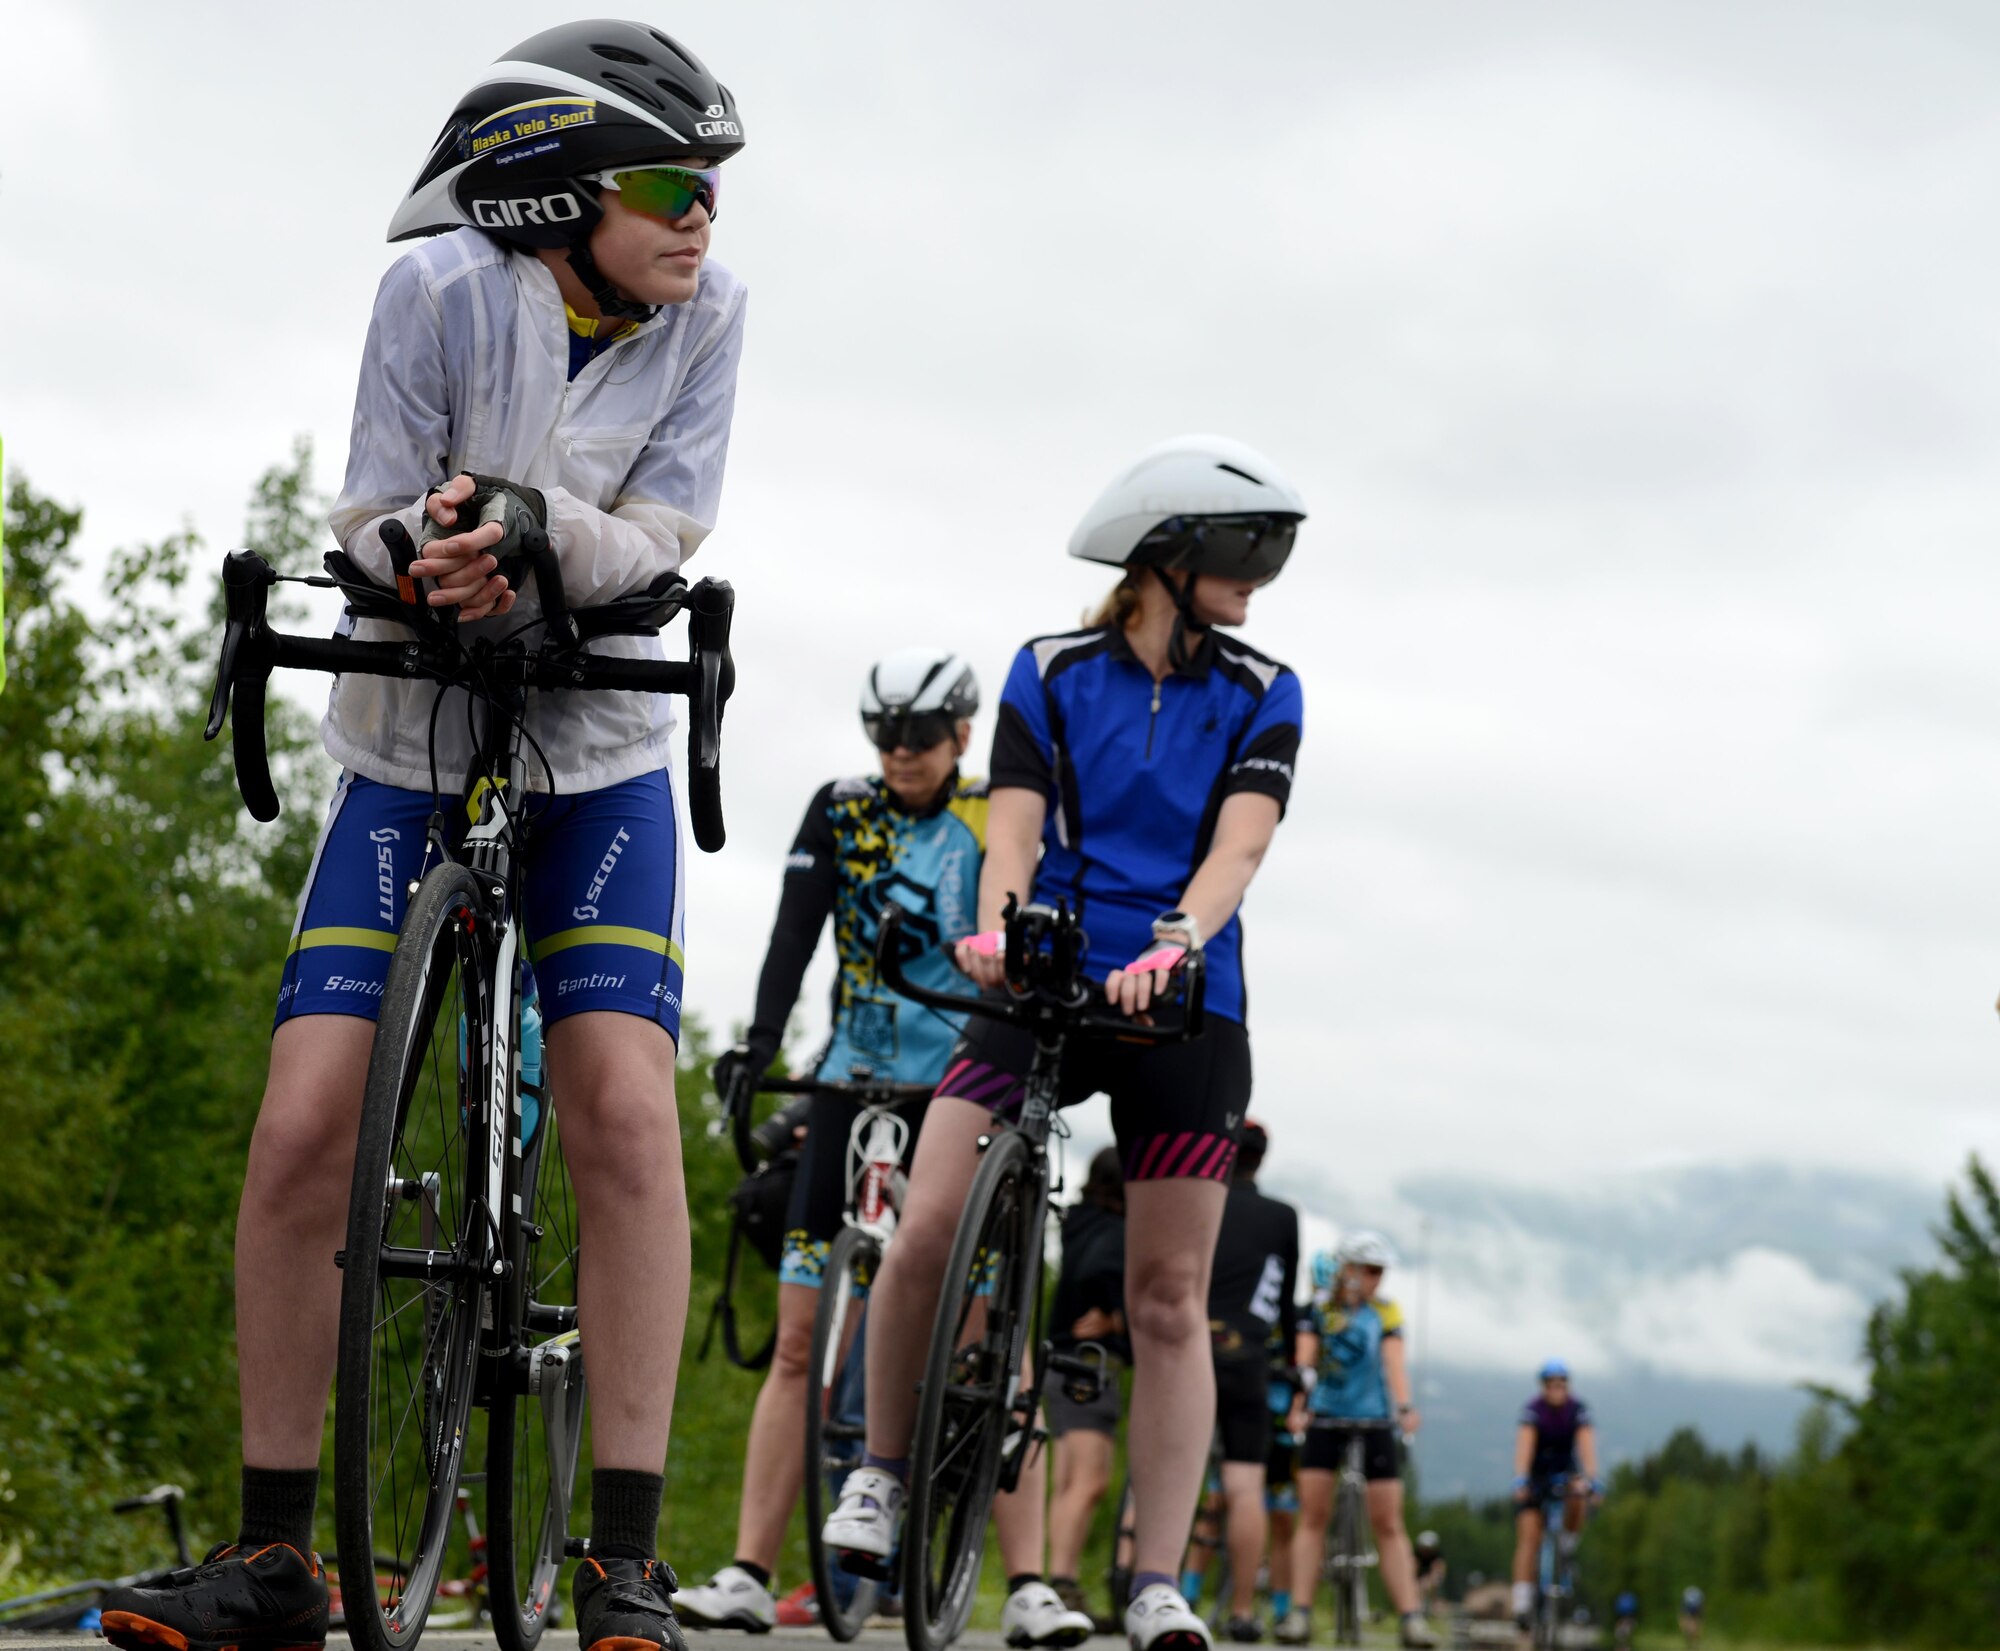 Arctic Bicycle Club athletes line up for the start of the 10-mile time-trial race at the Moose Run Golf Course at Joint Base Elmendorf-Richardson, Alaska, Aug. 3, 2017. For more than 15 years, the club has hosted road race events at JBER.